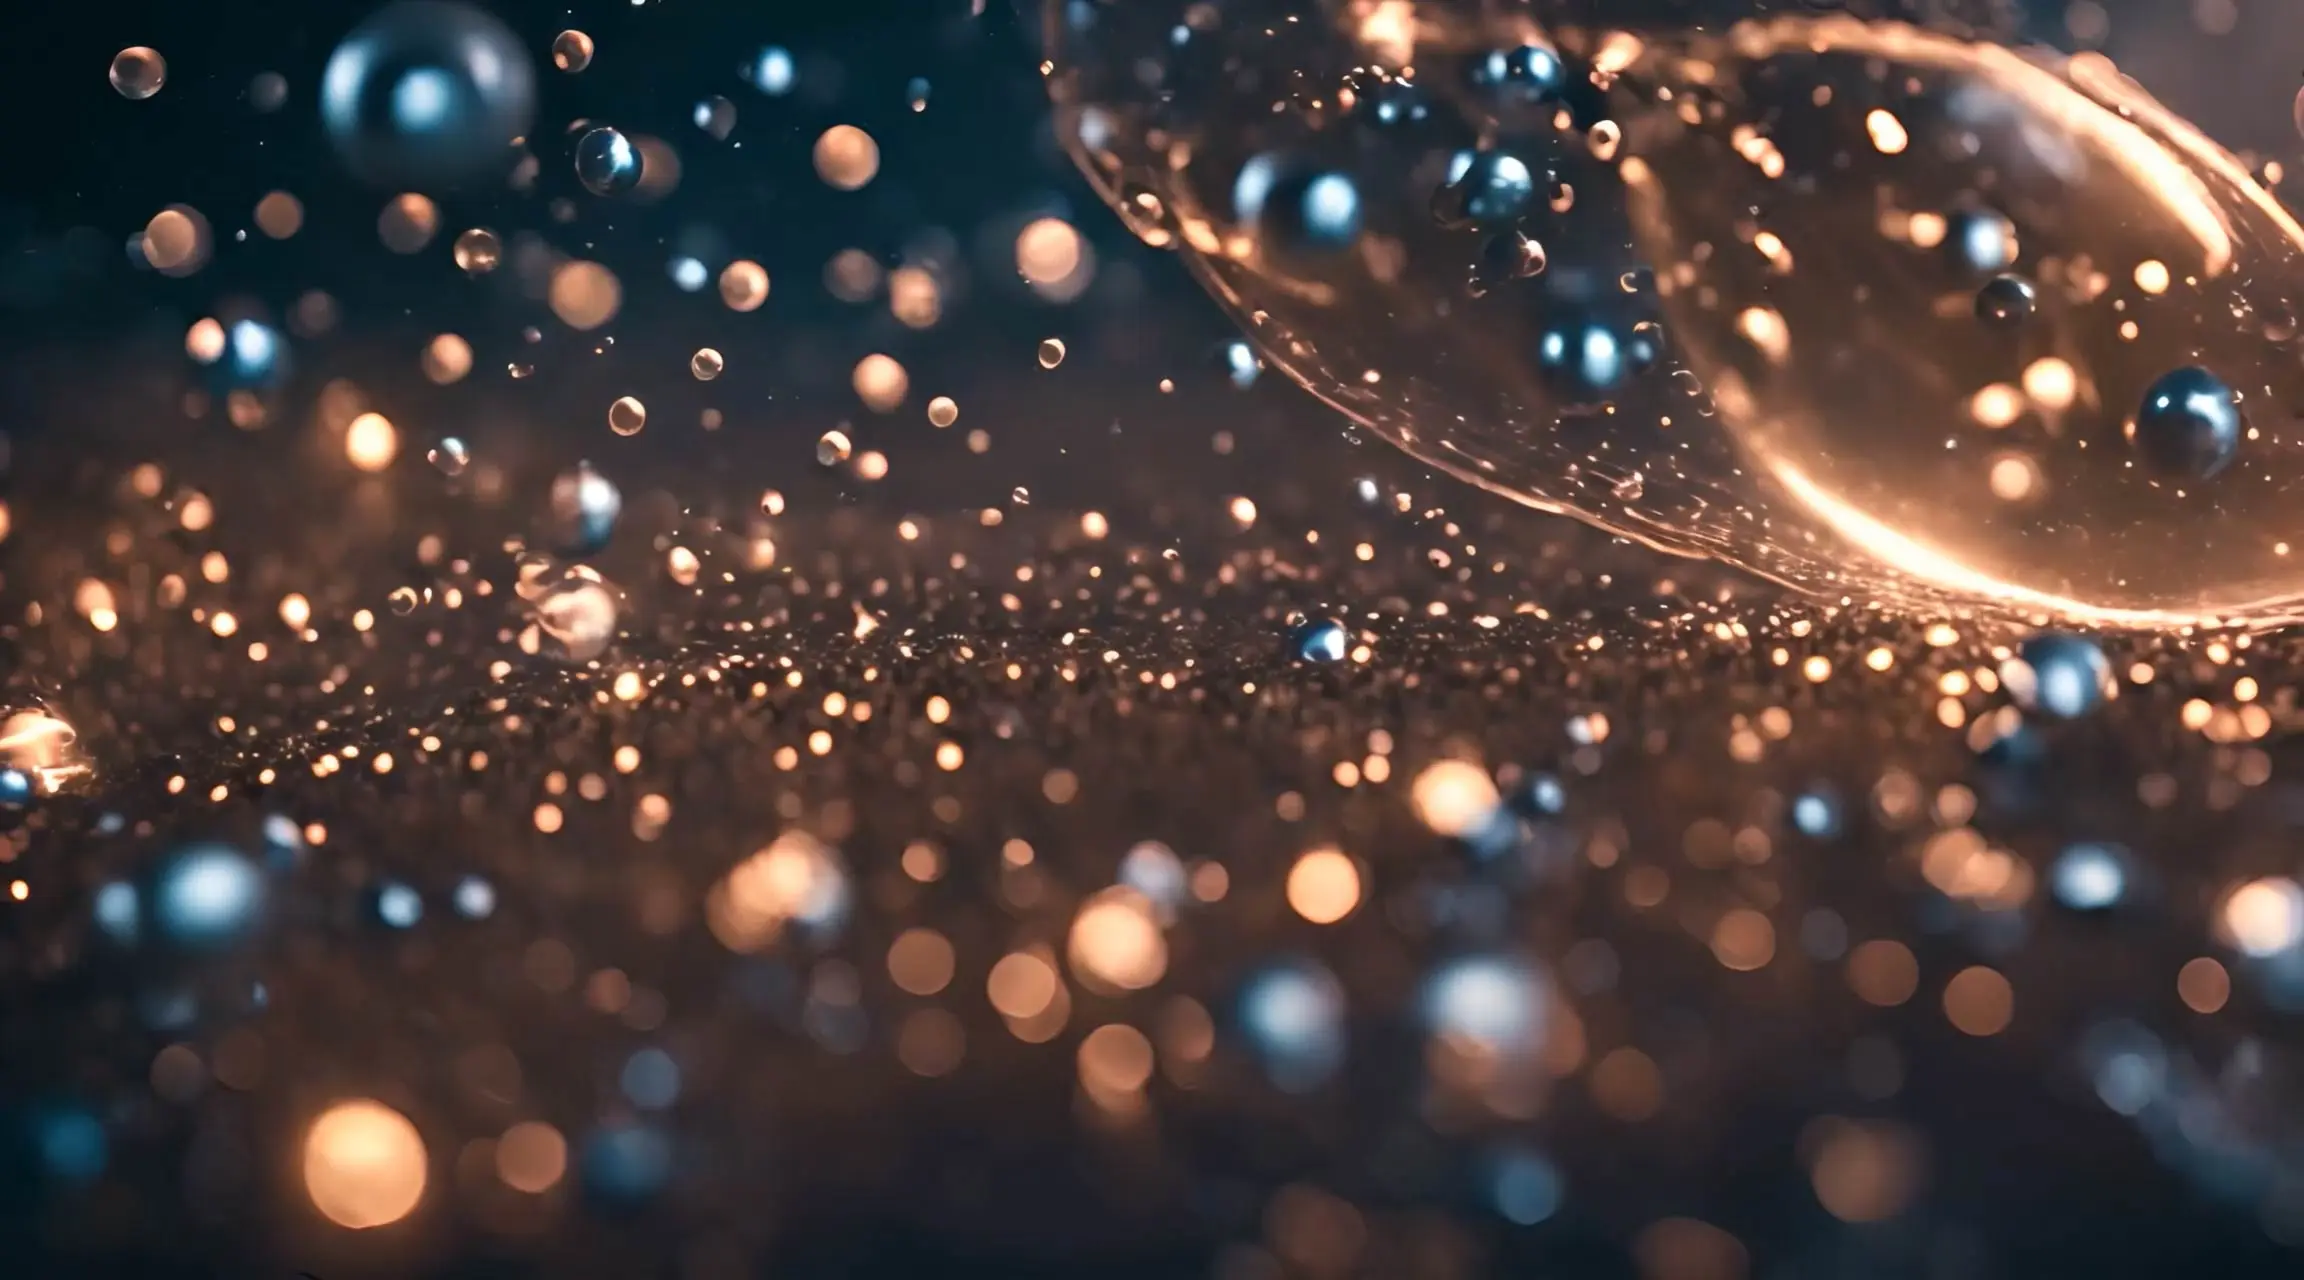 Floating Bubbles and Particles Motion Graphics